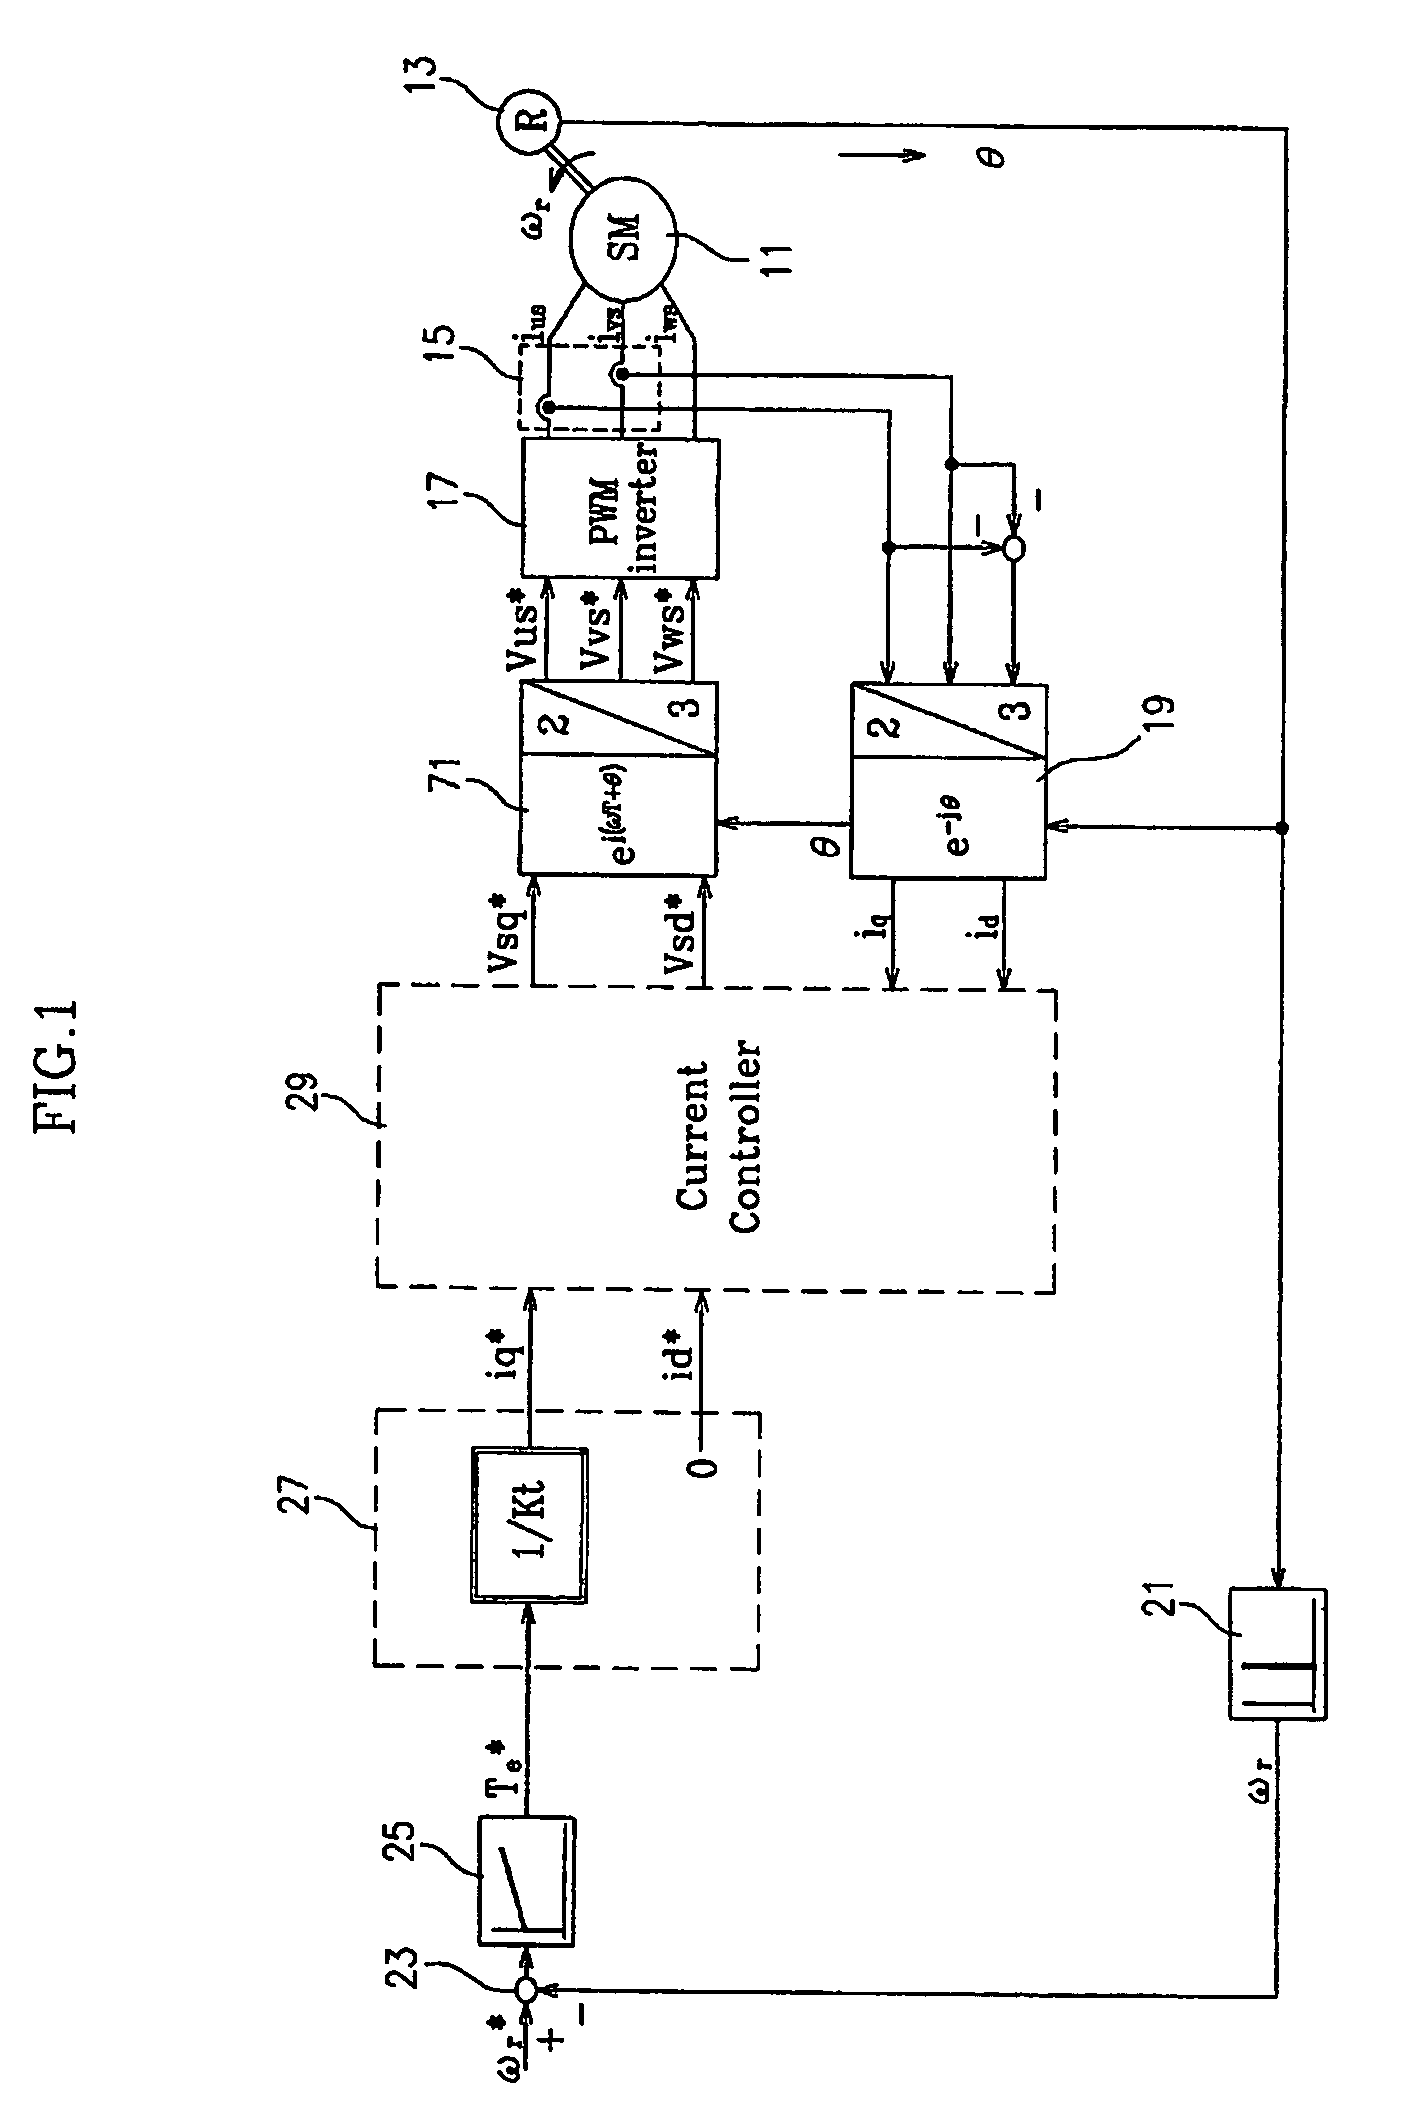 Method and system for controlling permanent magnet synchronous motor